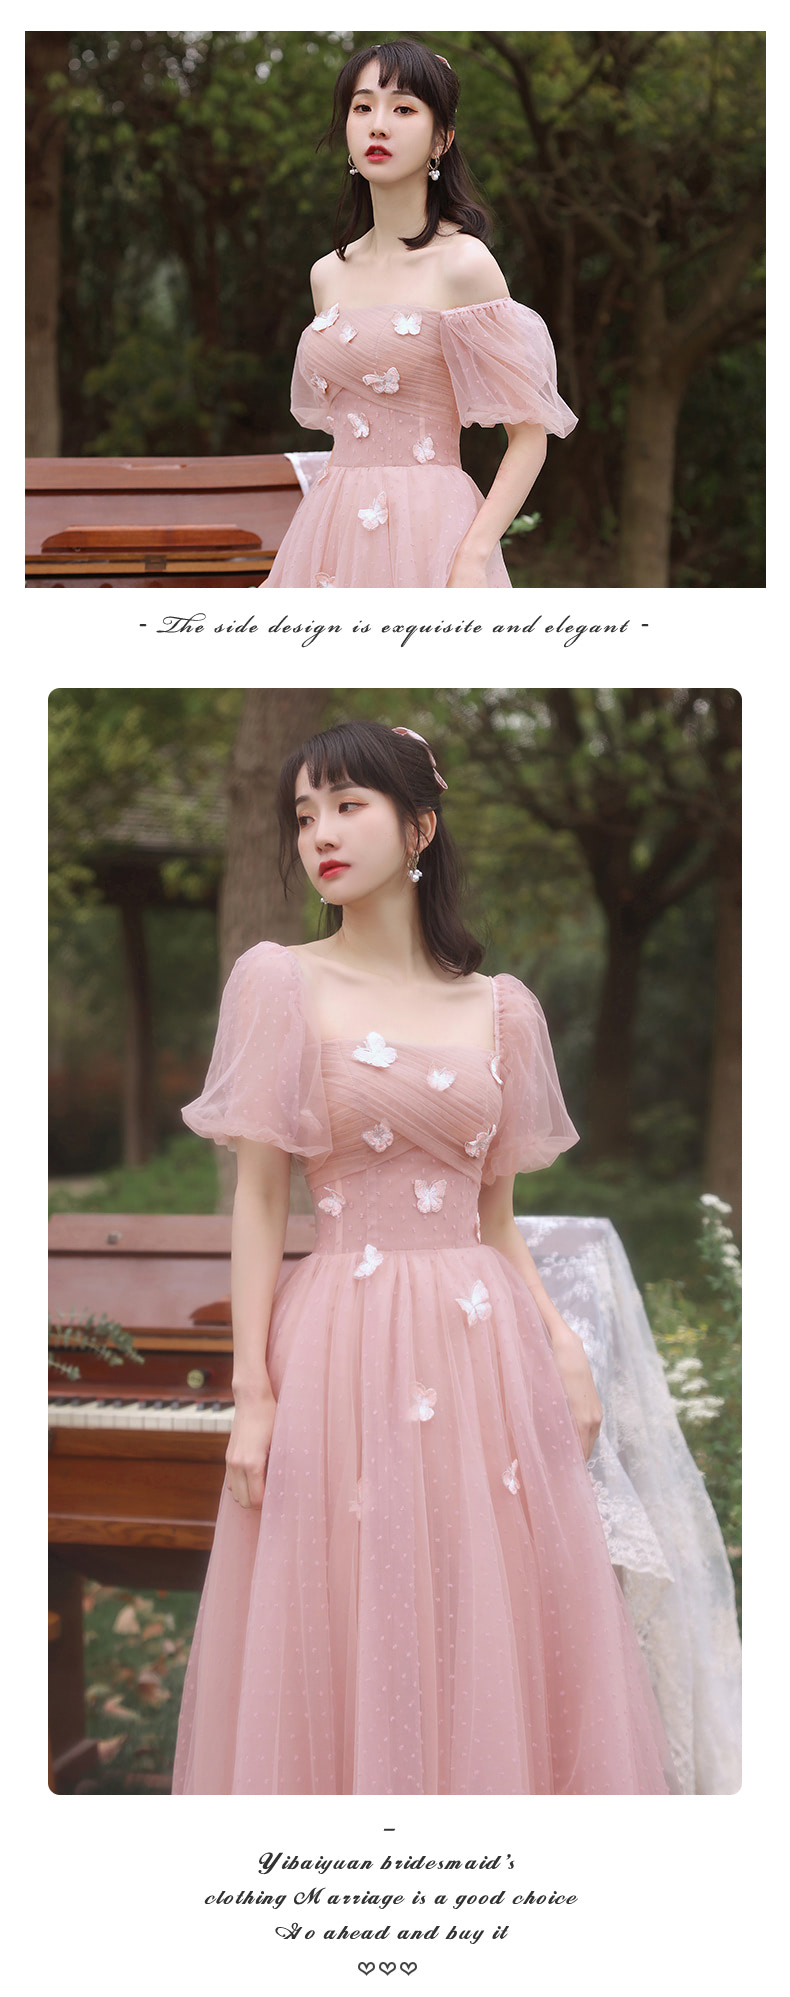 A-Line-Pink-Tulle-Bridesmaid-Formal-Wedding-Guest-Party-Dress16.jpg